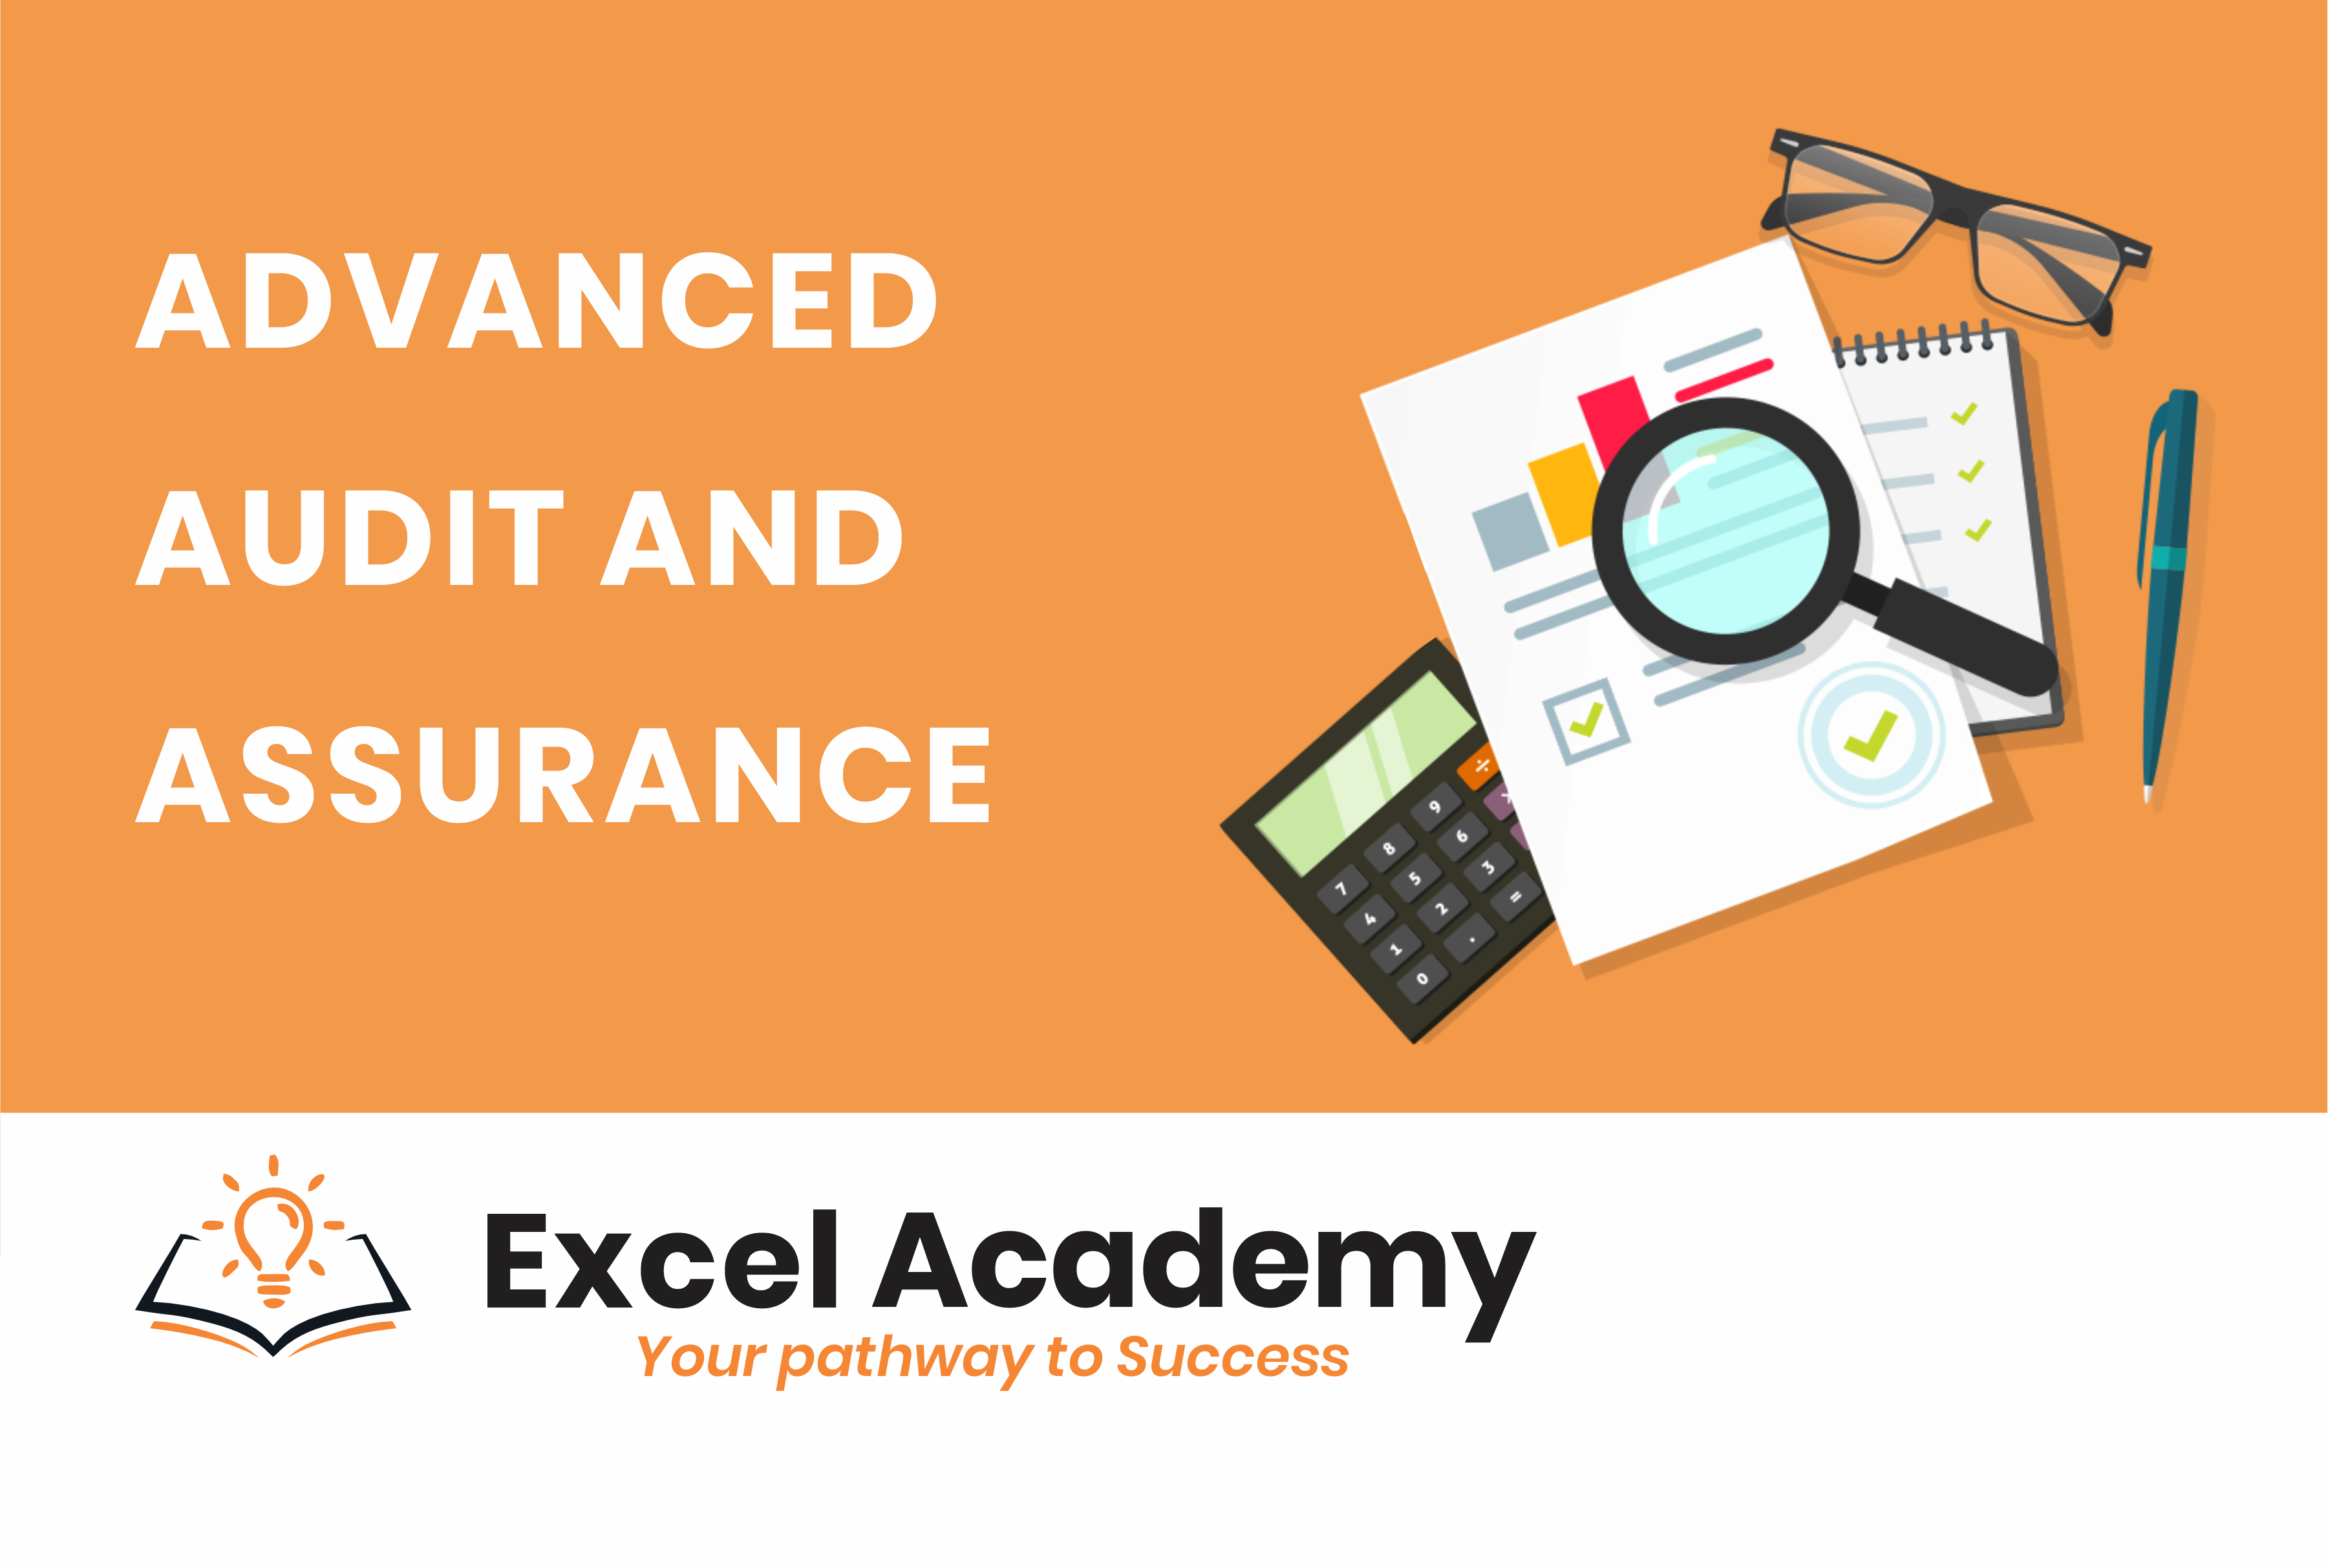 Advanced Audit and Assurance (Revision)